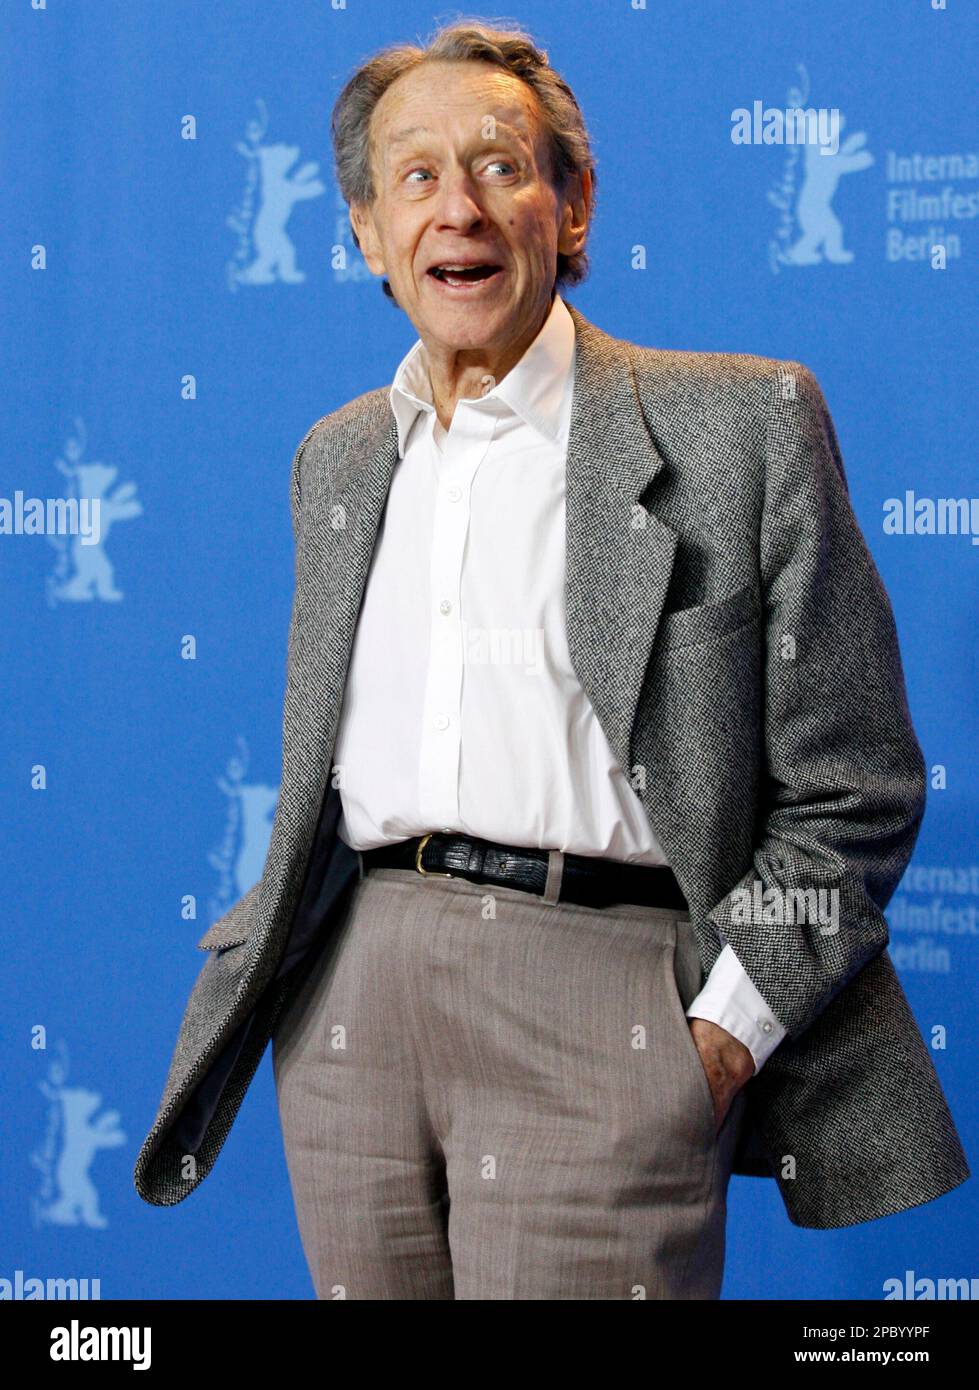 U.S. director Arthur Penn reacts during a photo-call at the 57th  International Film Festival Berlin 'Berlinale' in Berlin on Thursday, Feb.  15, 2007. Penn will be awarded with the Honorary Golden Bear